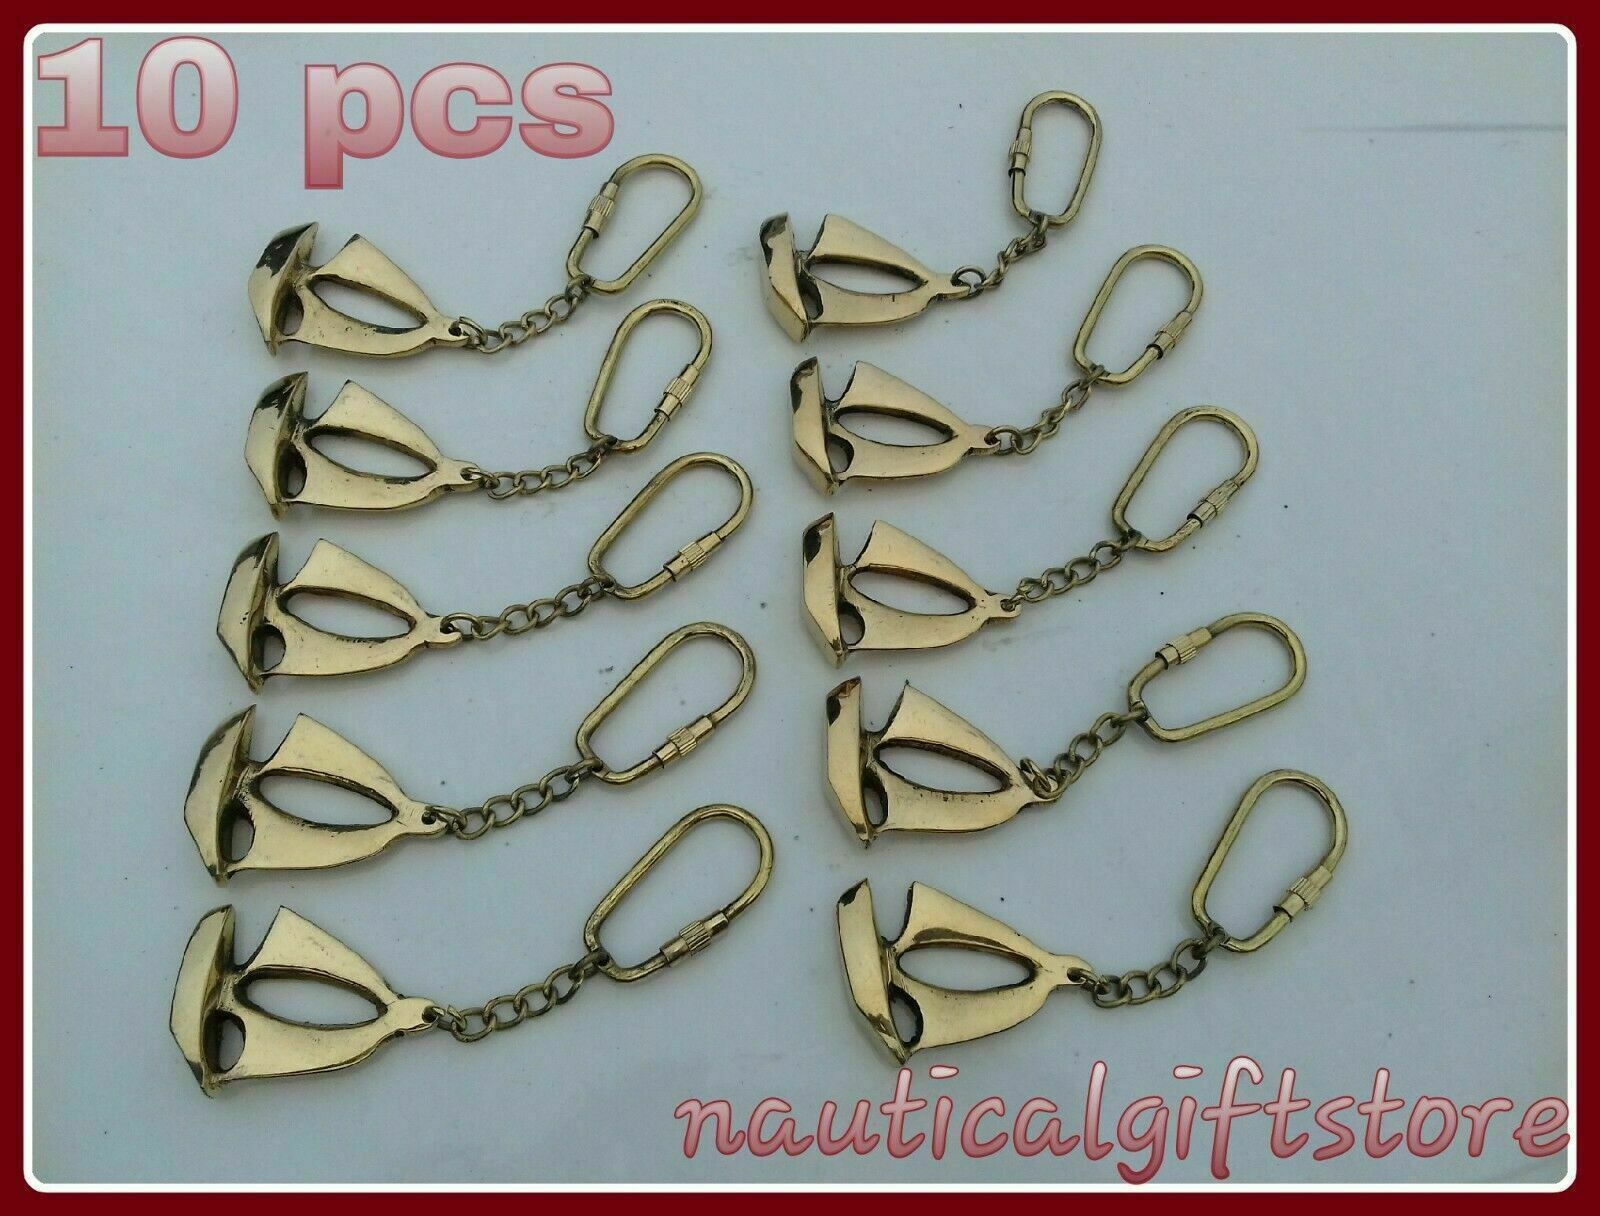 Lot of 10 PCs Solid Brass Marine Nautical Sailor Caption Boat Key-chain Ring